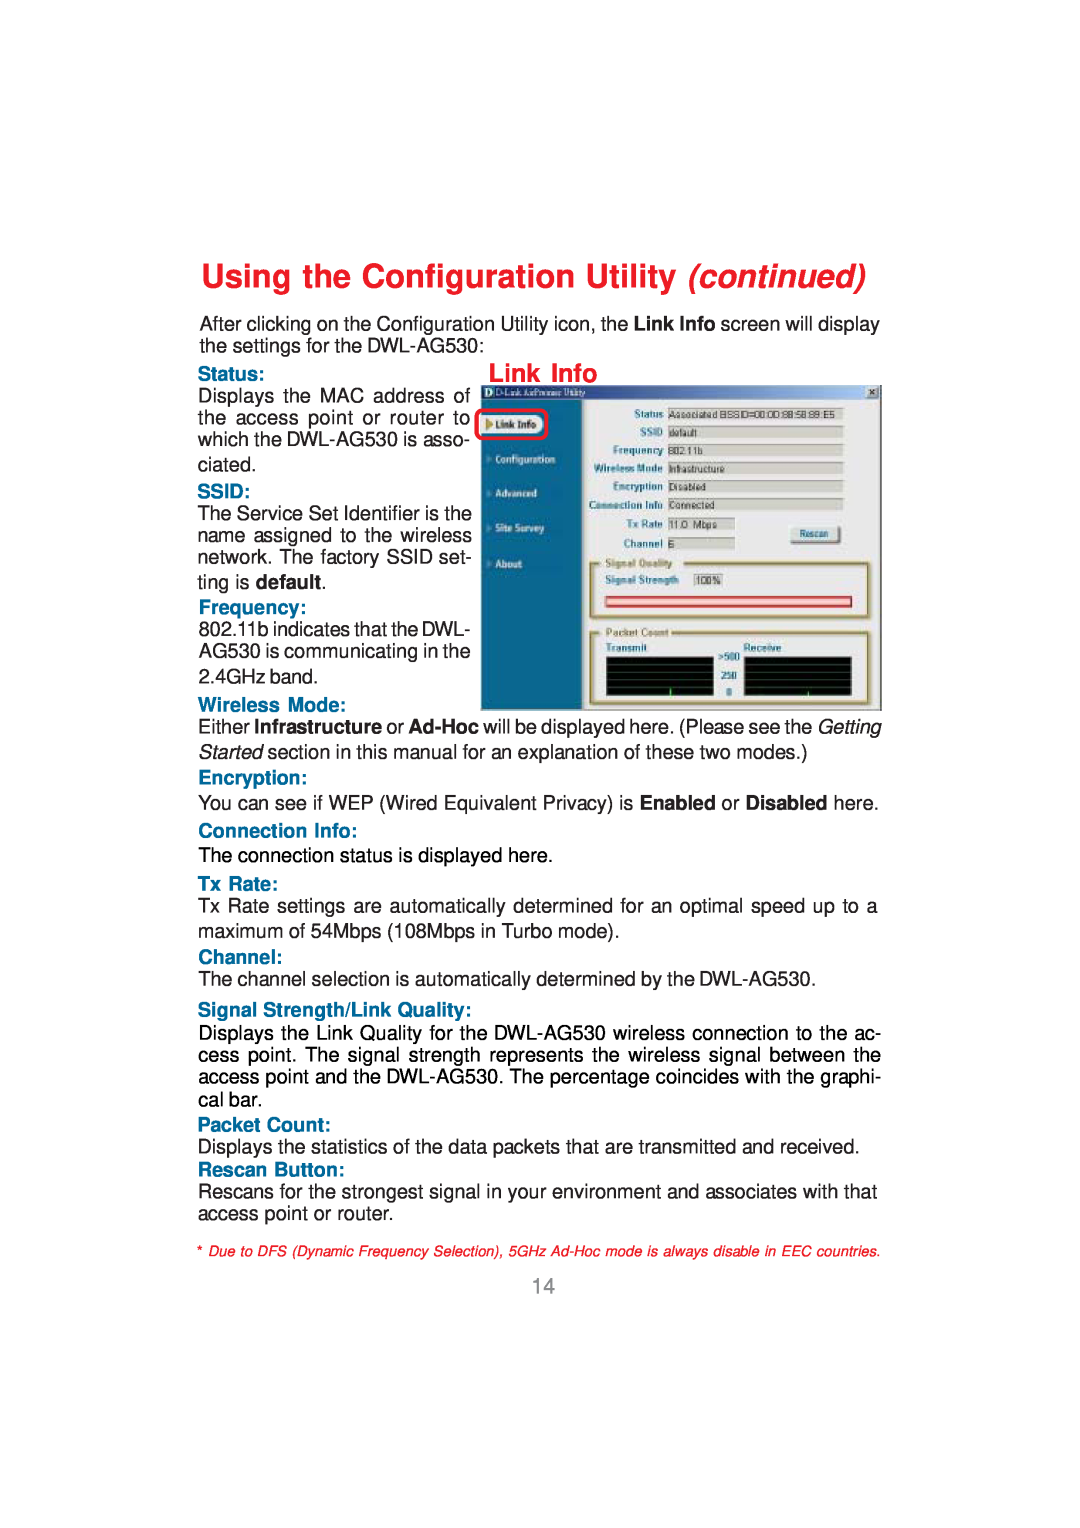 D-Link DWL-AG530 Using the Configuration Utility continued, Link Info, Status, Ssid, Frequency, Wireless Mode, Encryption 